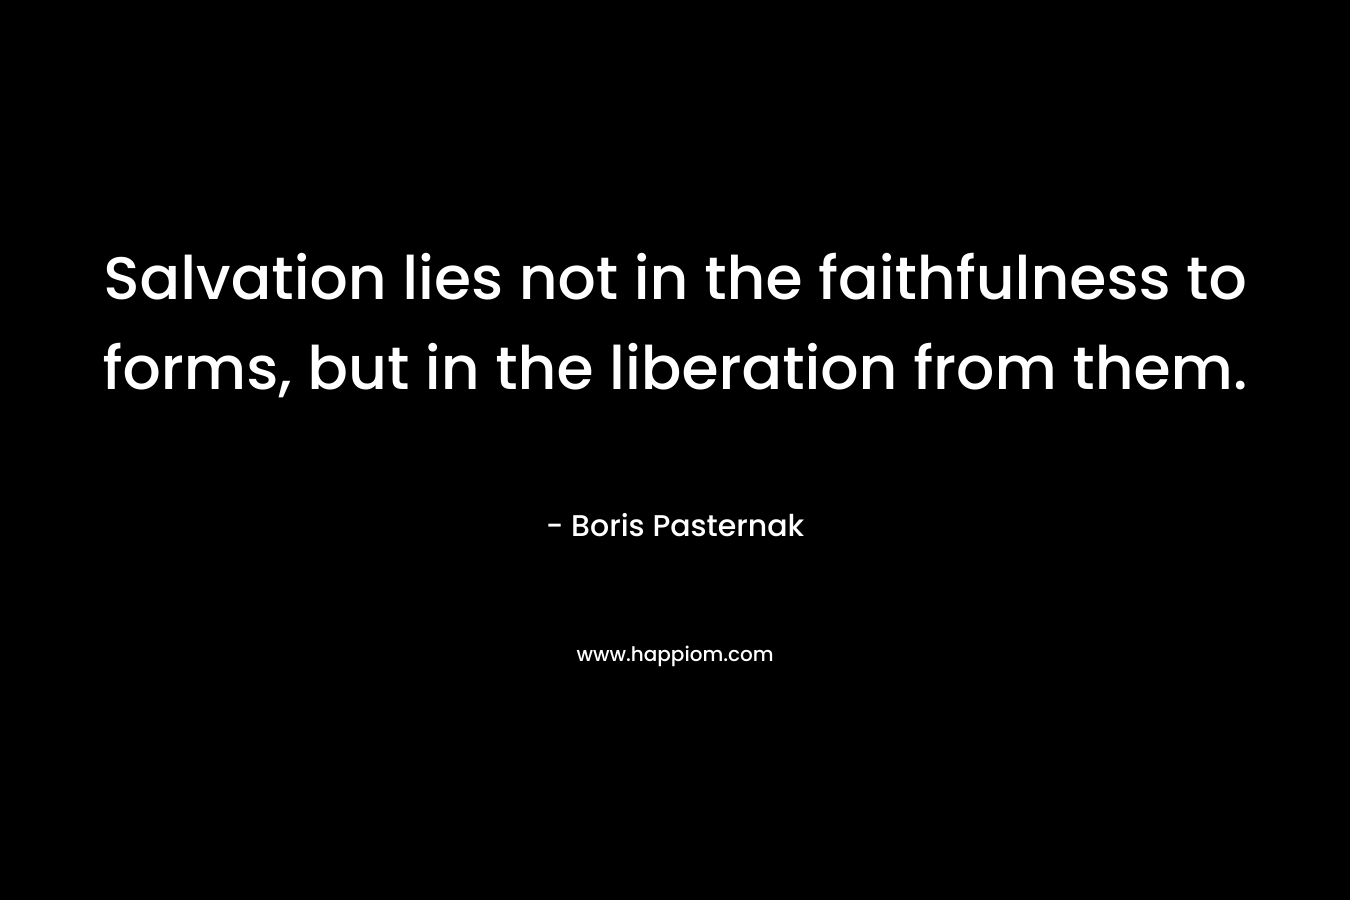 Salvation lies not in the faithfulness to forms, but in the liberation from them. – Boris Pasternak